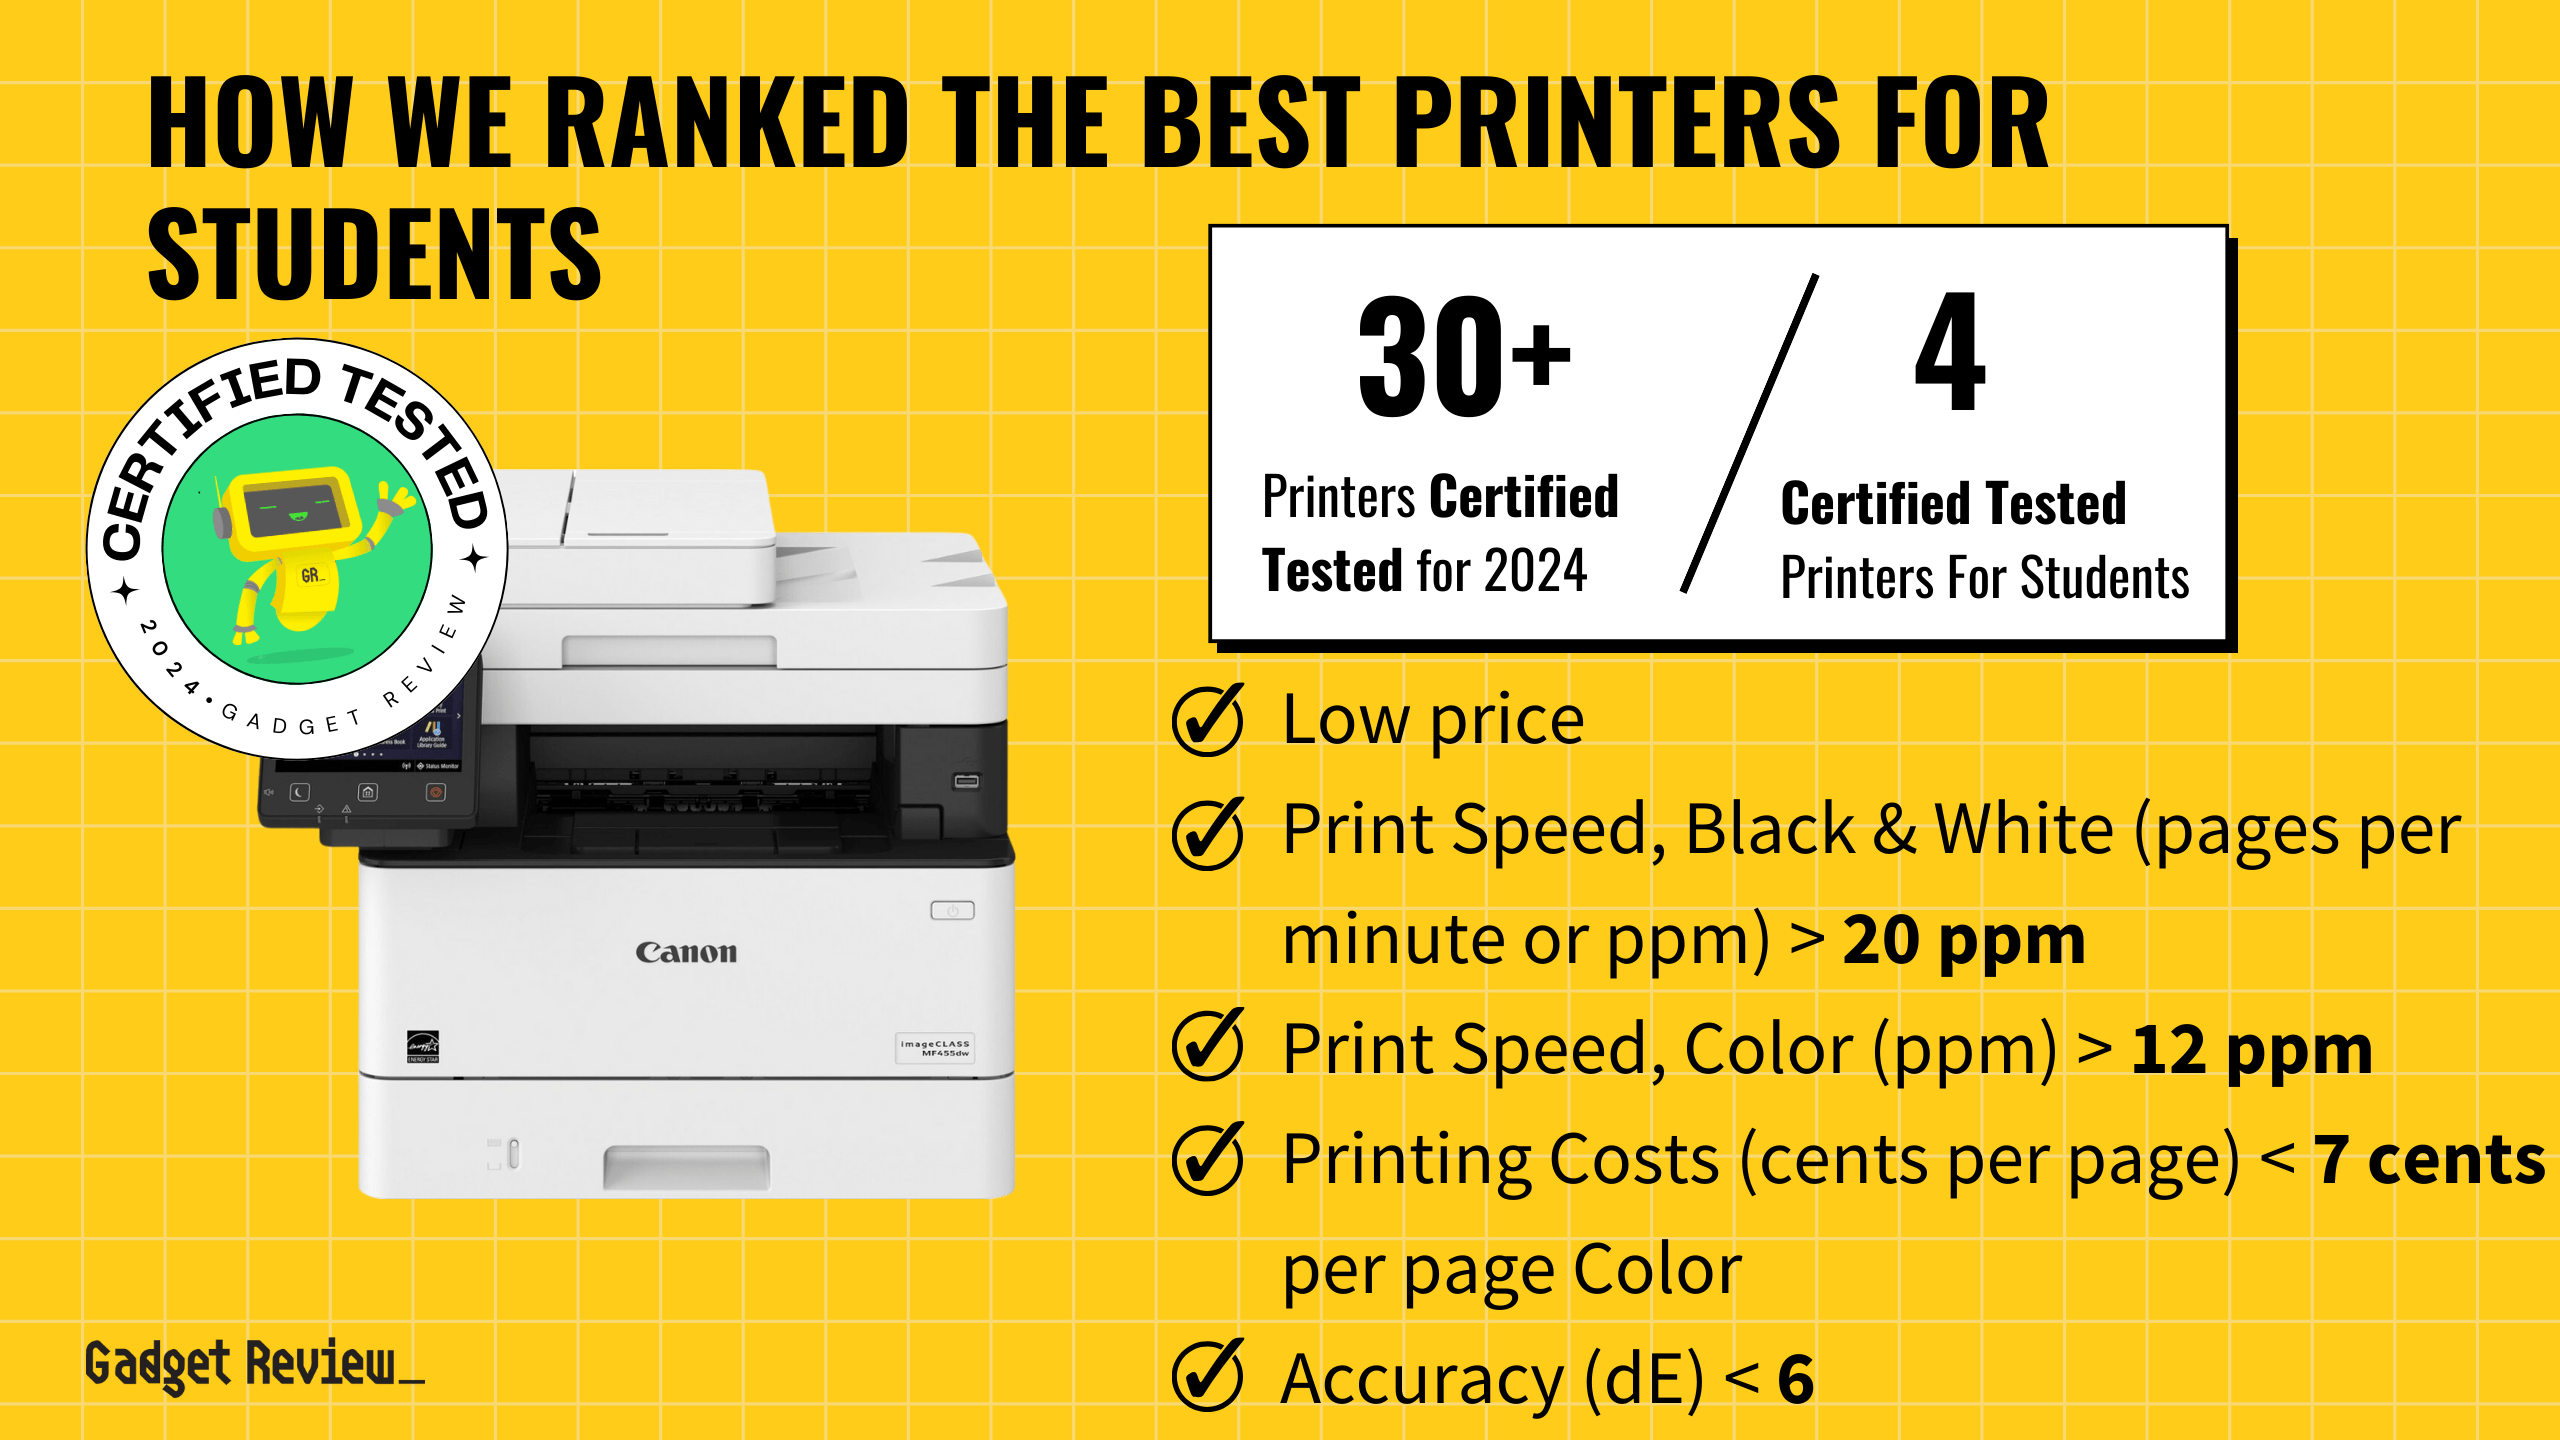 Top Printers for Students of 2024 Ranked